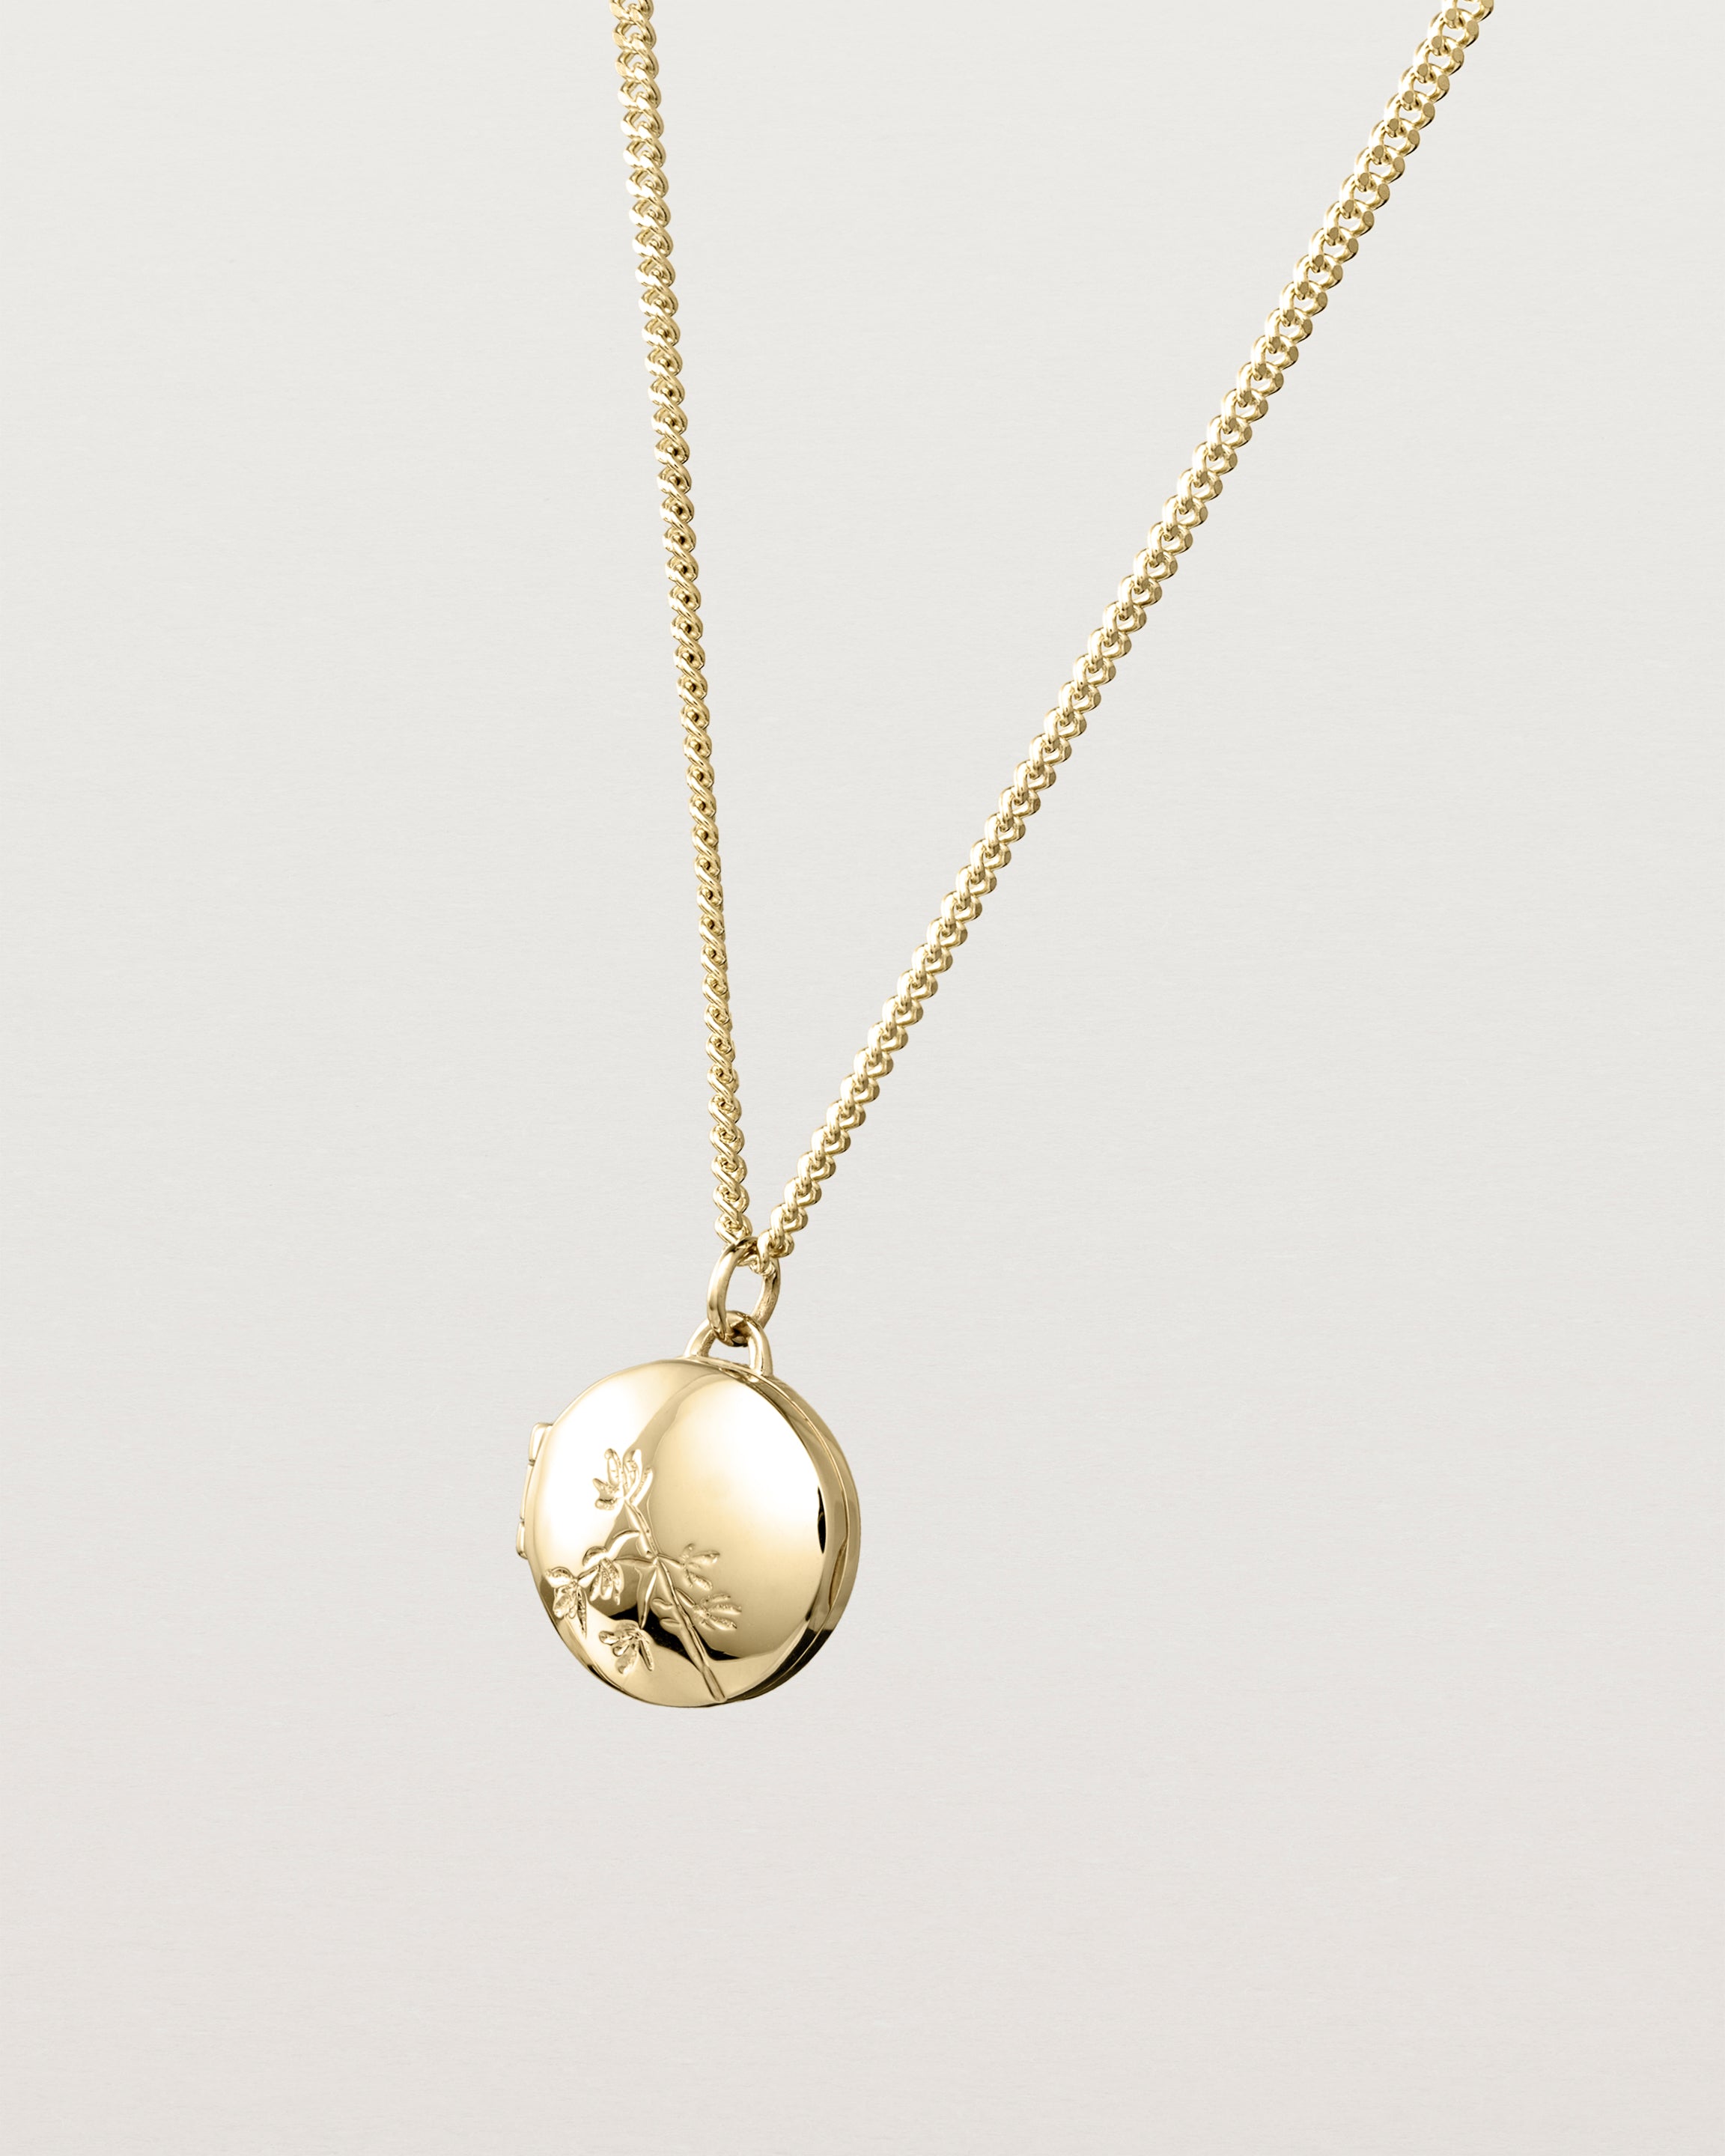 Angled view of the Spotted Orchid Locket in yellow gold.